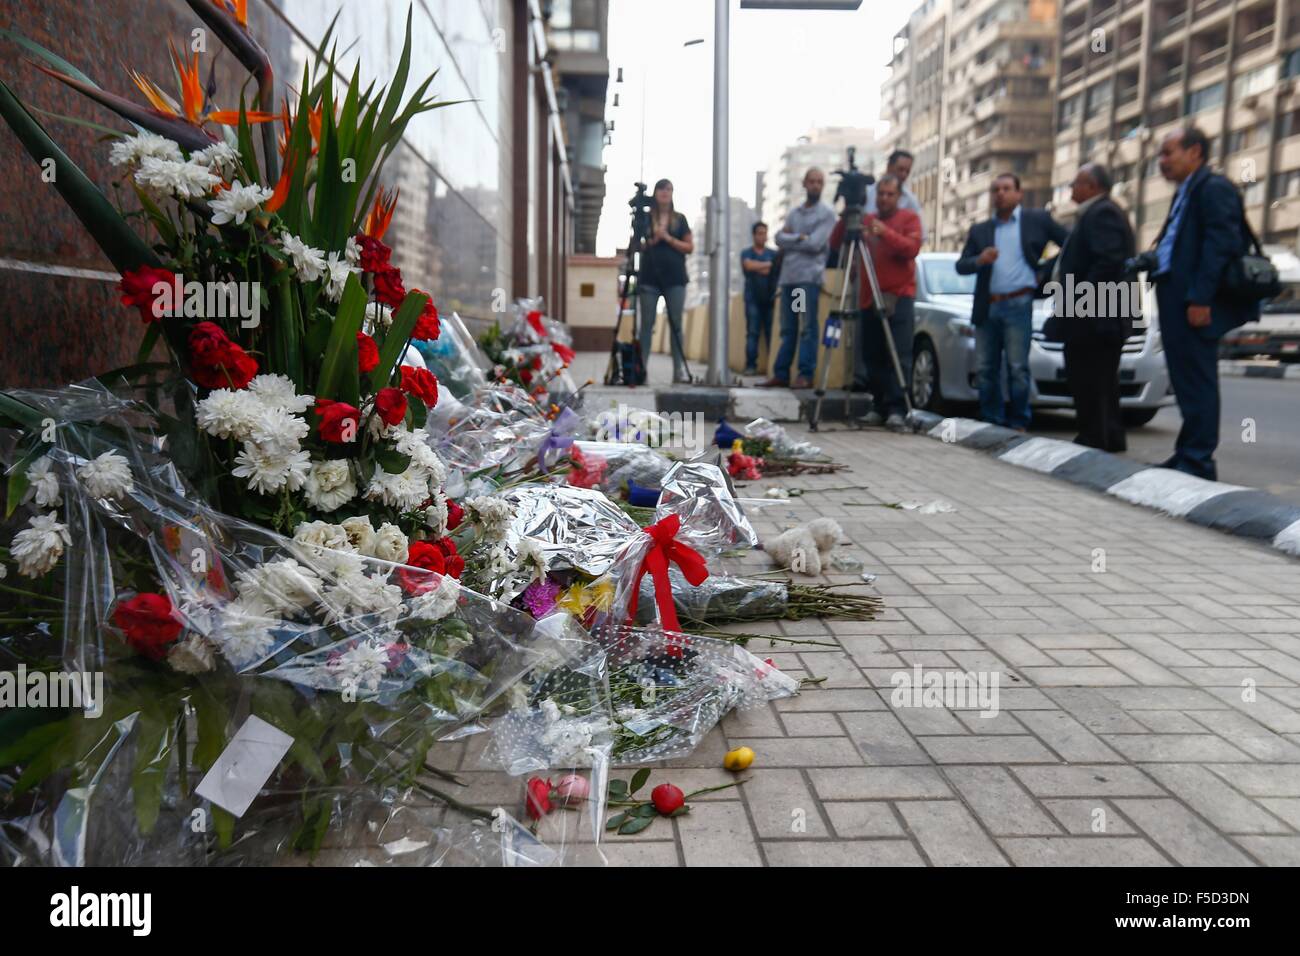 Cairo. 2nd Nov, 2015. Floral tributes are placed outside the Russian embassy in Cairo on Nov. 2, 2015. Some 144 victims' bodies in a Russian airliner crash in Egypt were transferred to the Russian city of Saint Petersburg early on Monday, the Russian ambassador in Cairo said. © Cui Xinyu/Xinhua/Alamy Live News Stock Photo